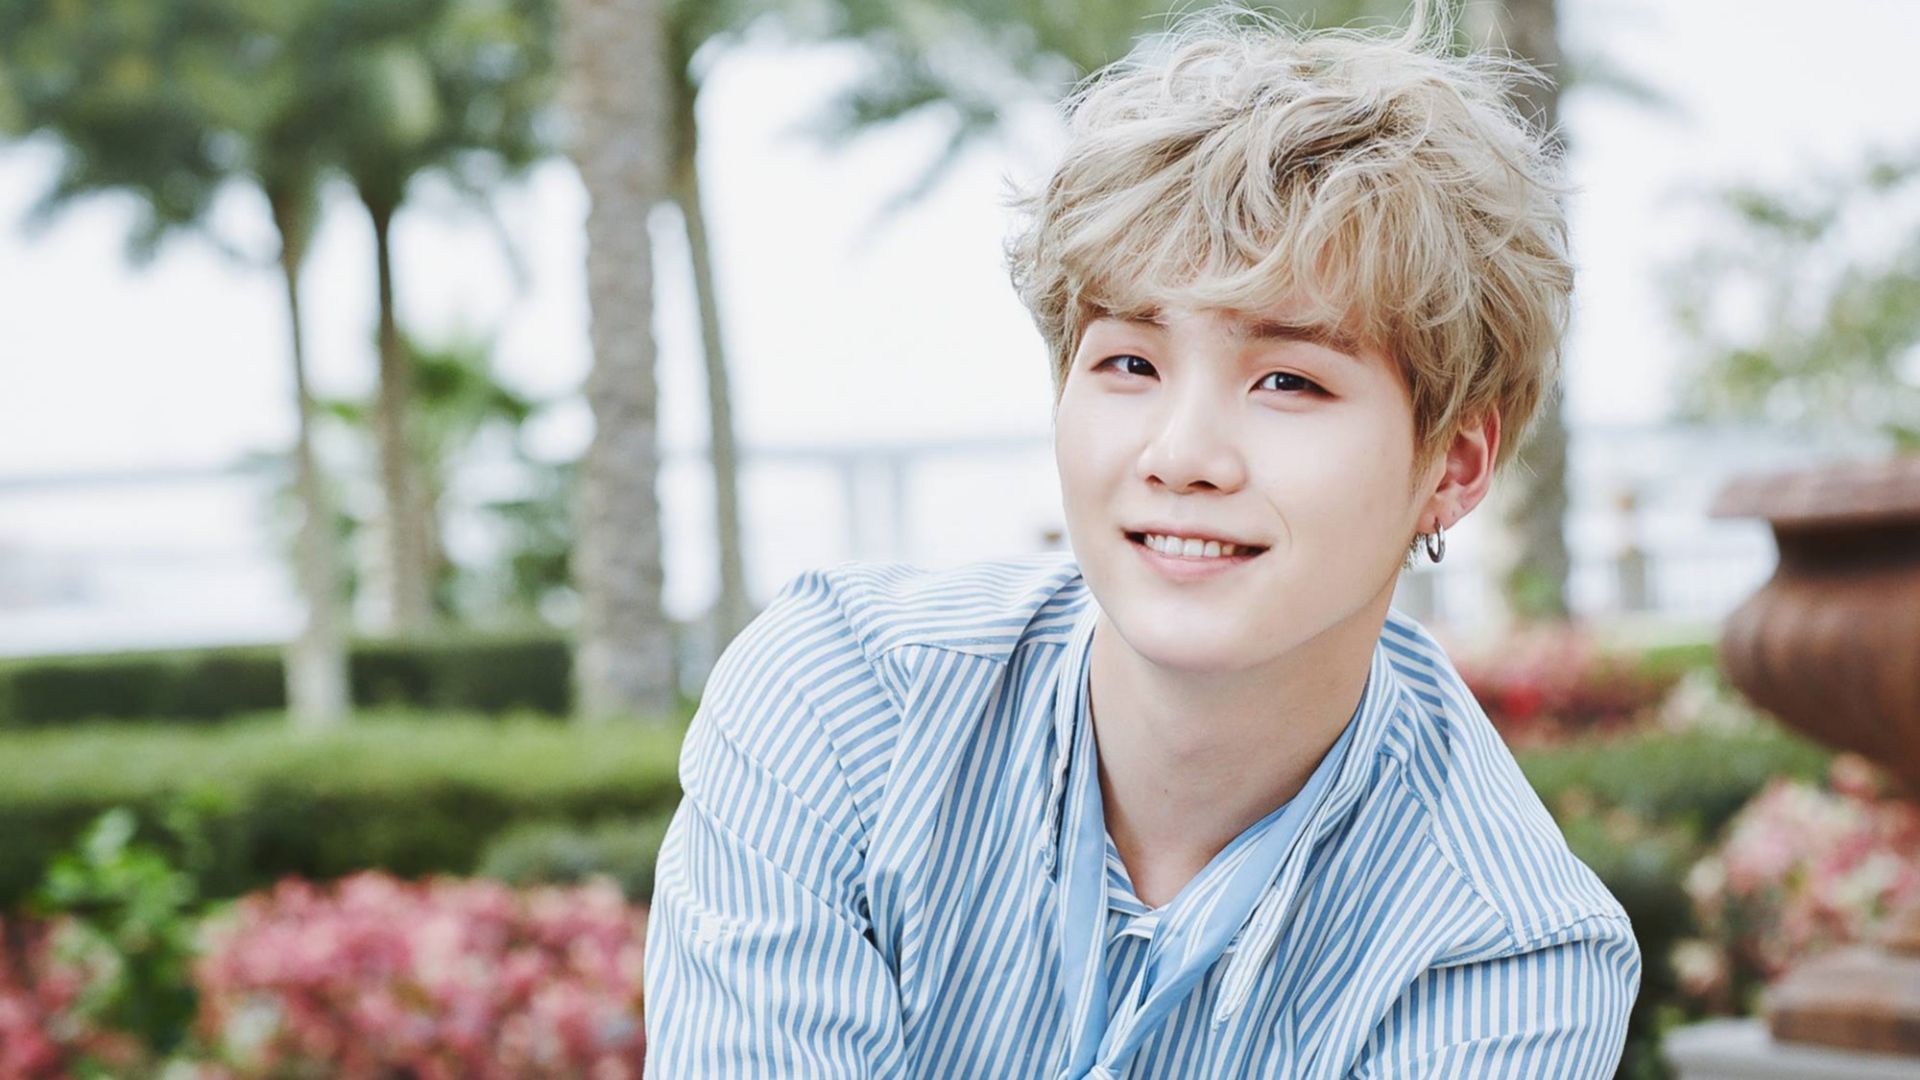 Free download Suga BTS image Suga HD wallpaper and background photo 40936573 [1920x1080] for your Desktop, Mobile & Tablet. Explore BTS Yoongi Wallpaper. BTS Yoongi Wallpaper, BTS Wallpaper, BTS Jin Wallpaper